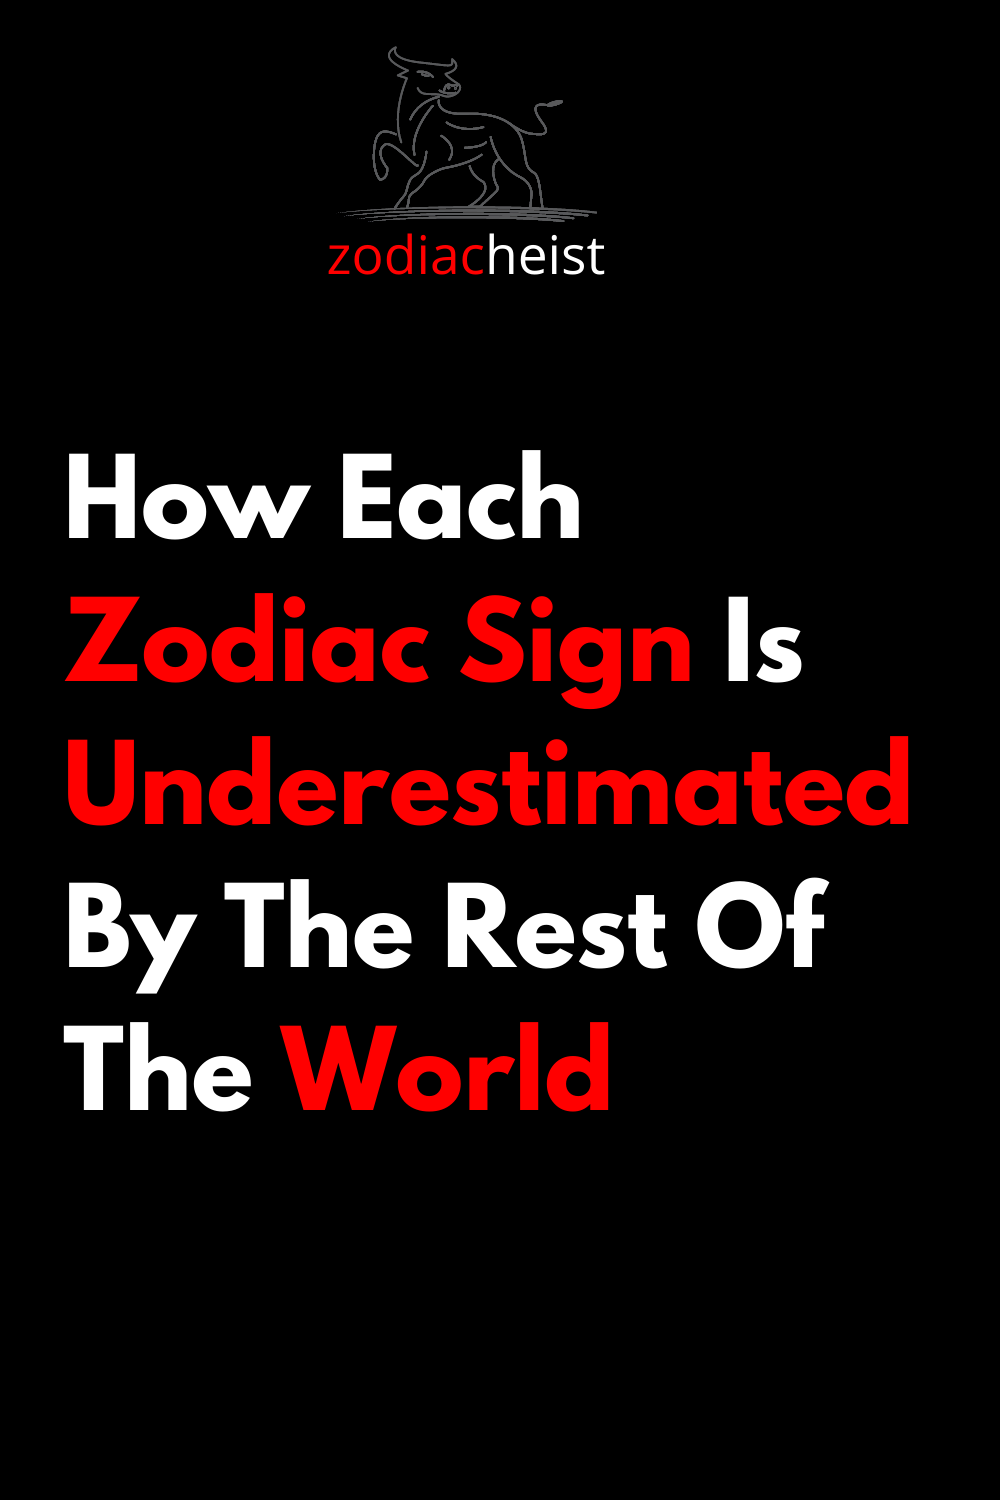 How Each Zodiac Sign Is Underestimated By The Rest Of The World